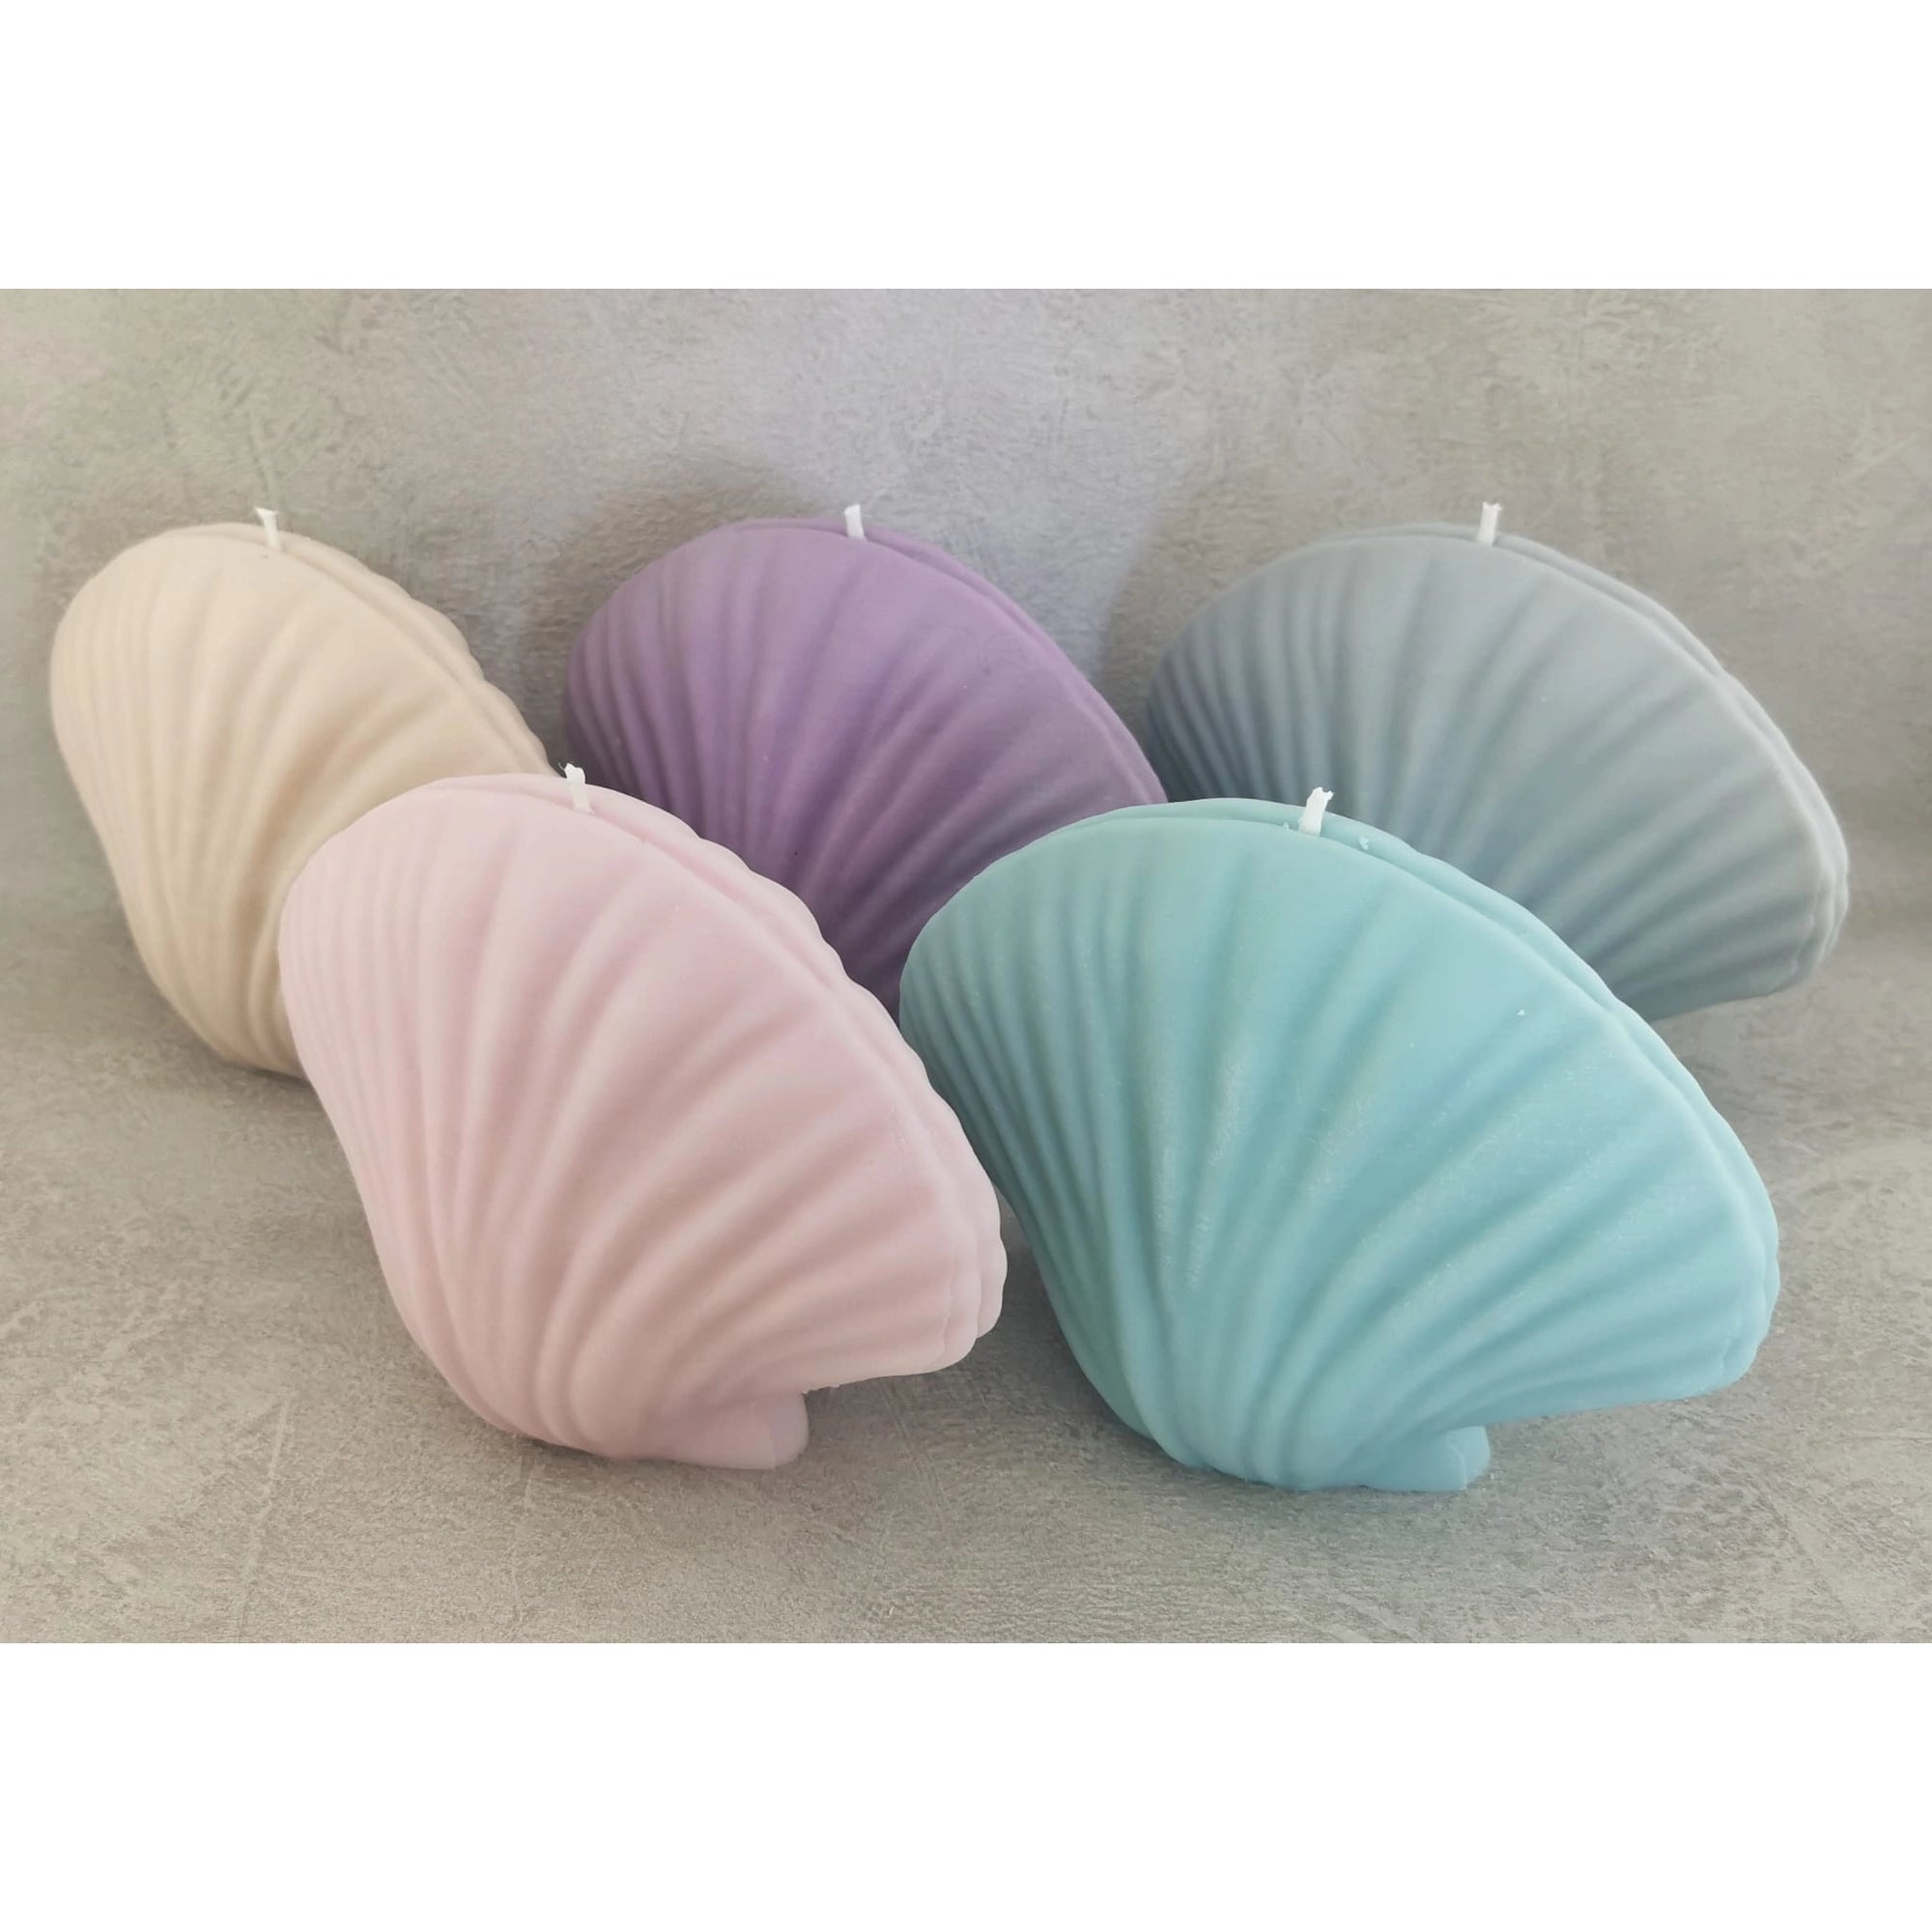 Large Shell Candle - Pink